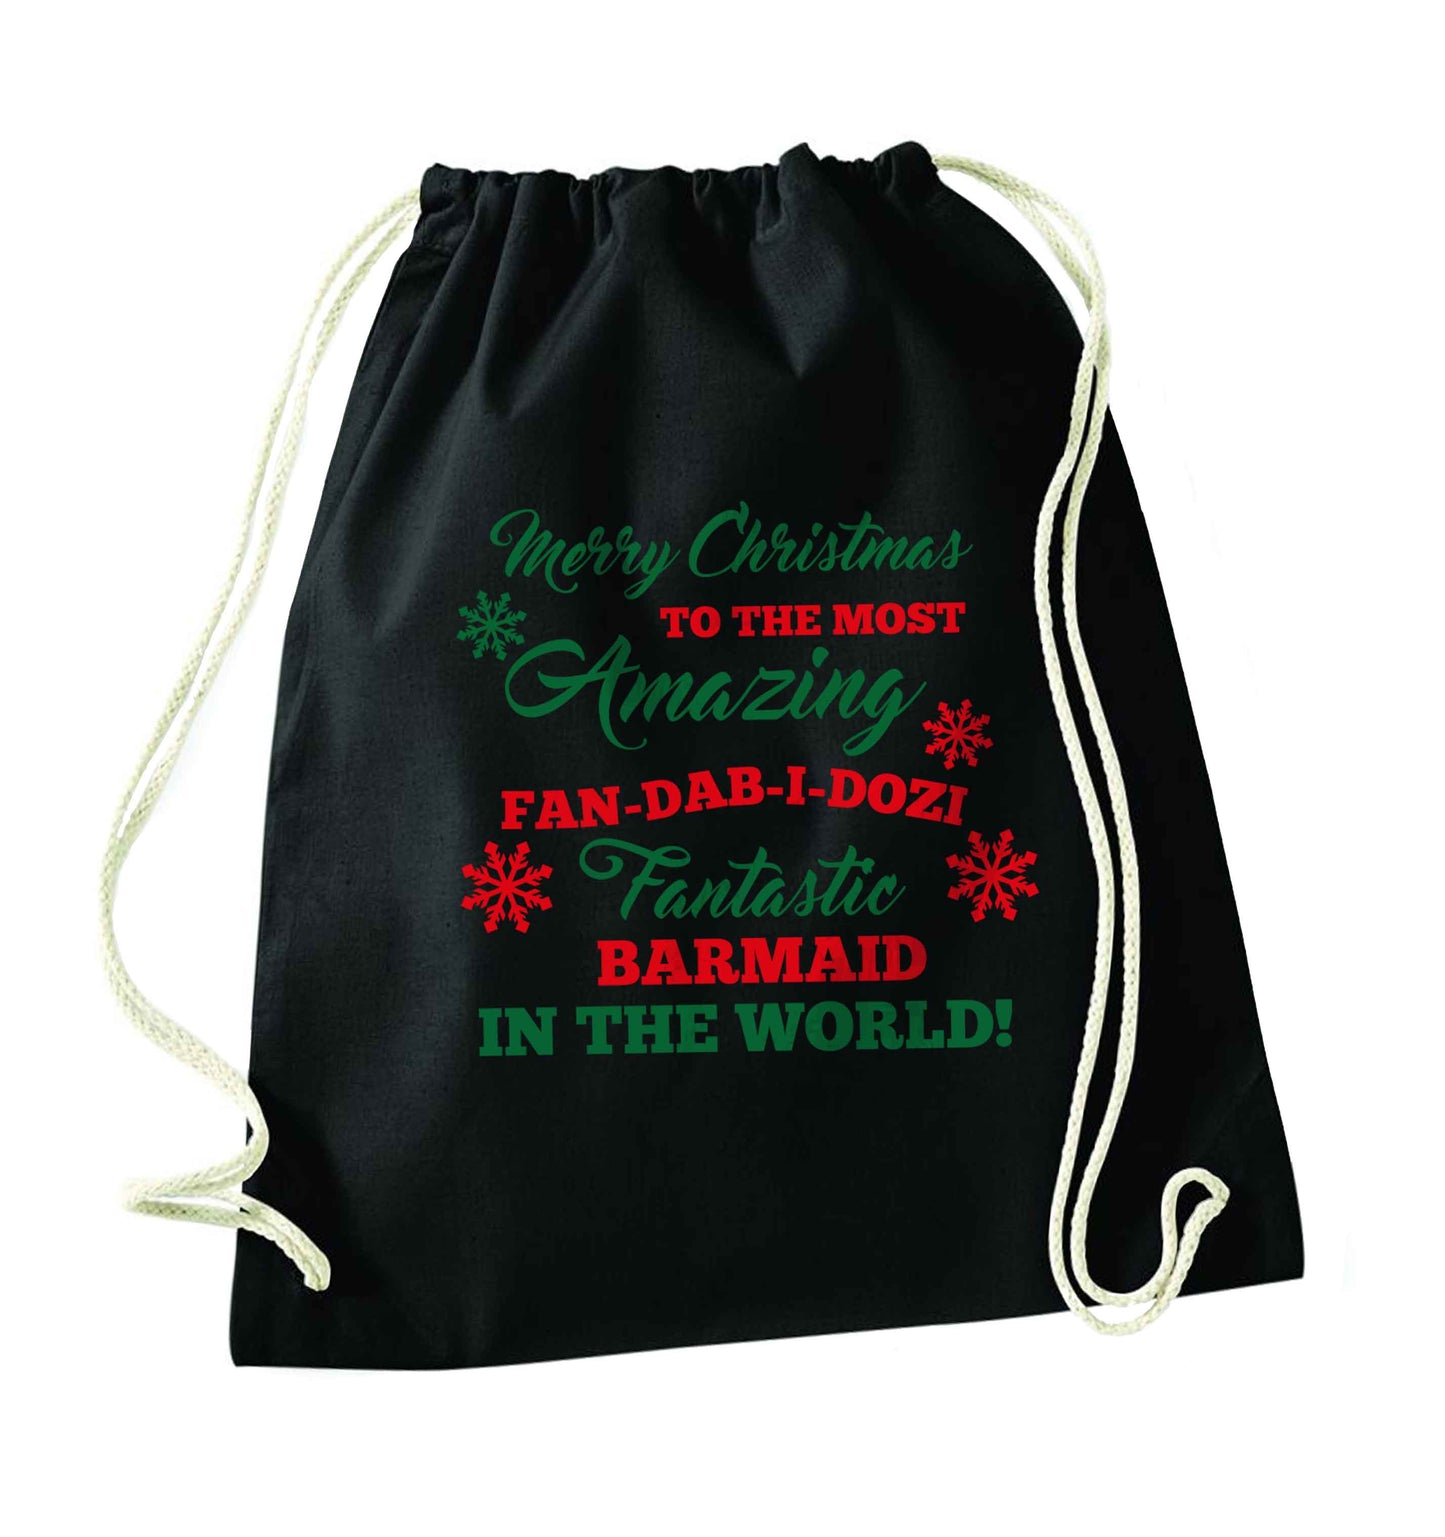 Merry Christmas to the most amazing barmaid in the world! black drawstring bag